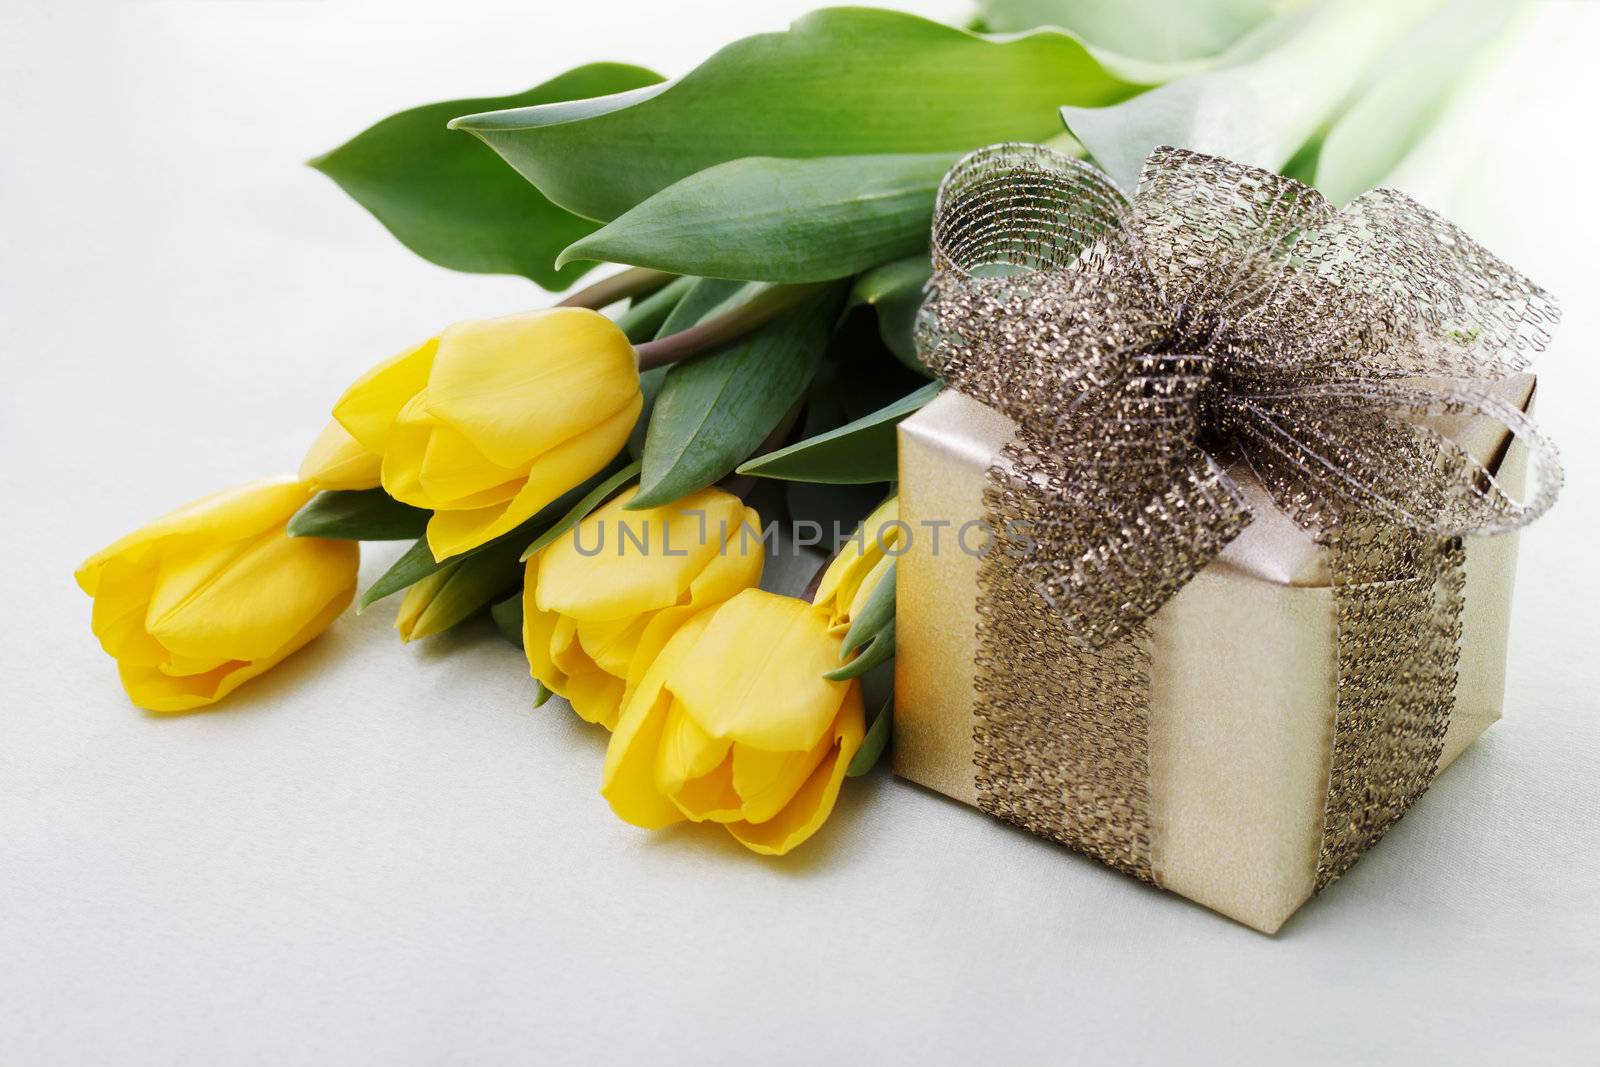 Tulips and Giftbox Isolated on White